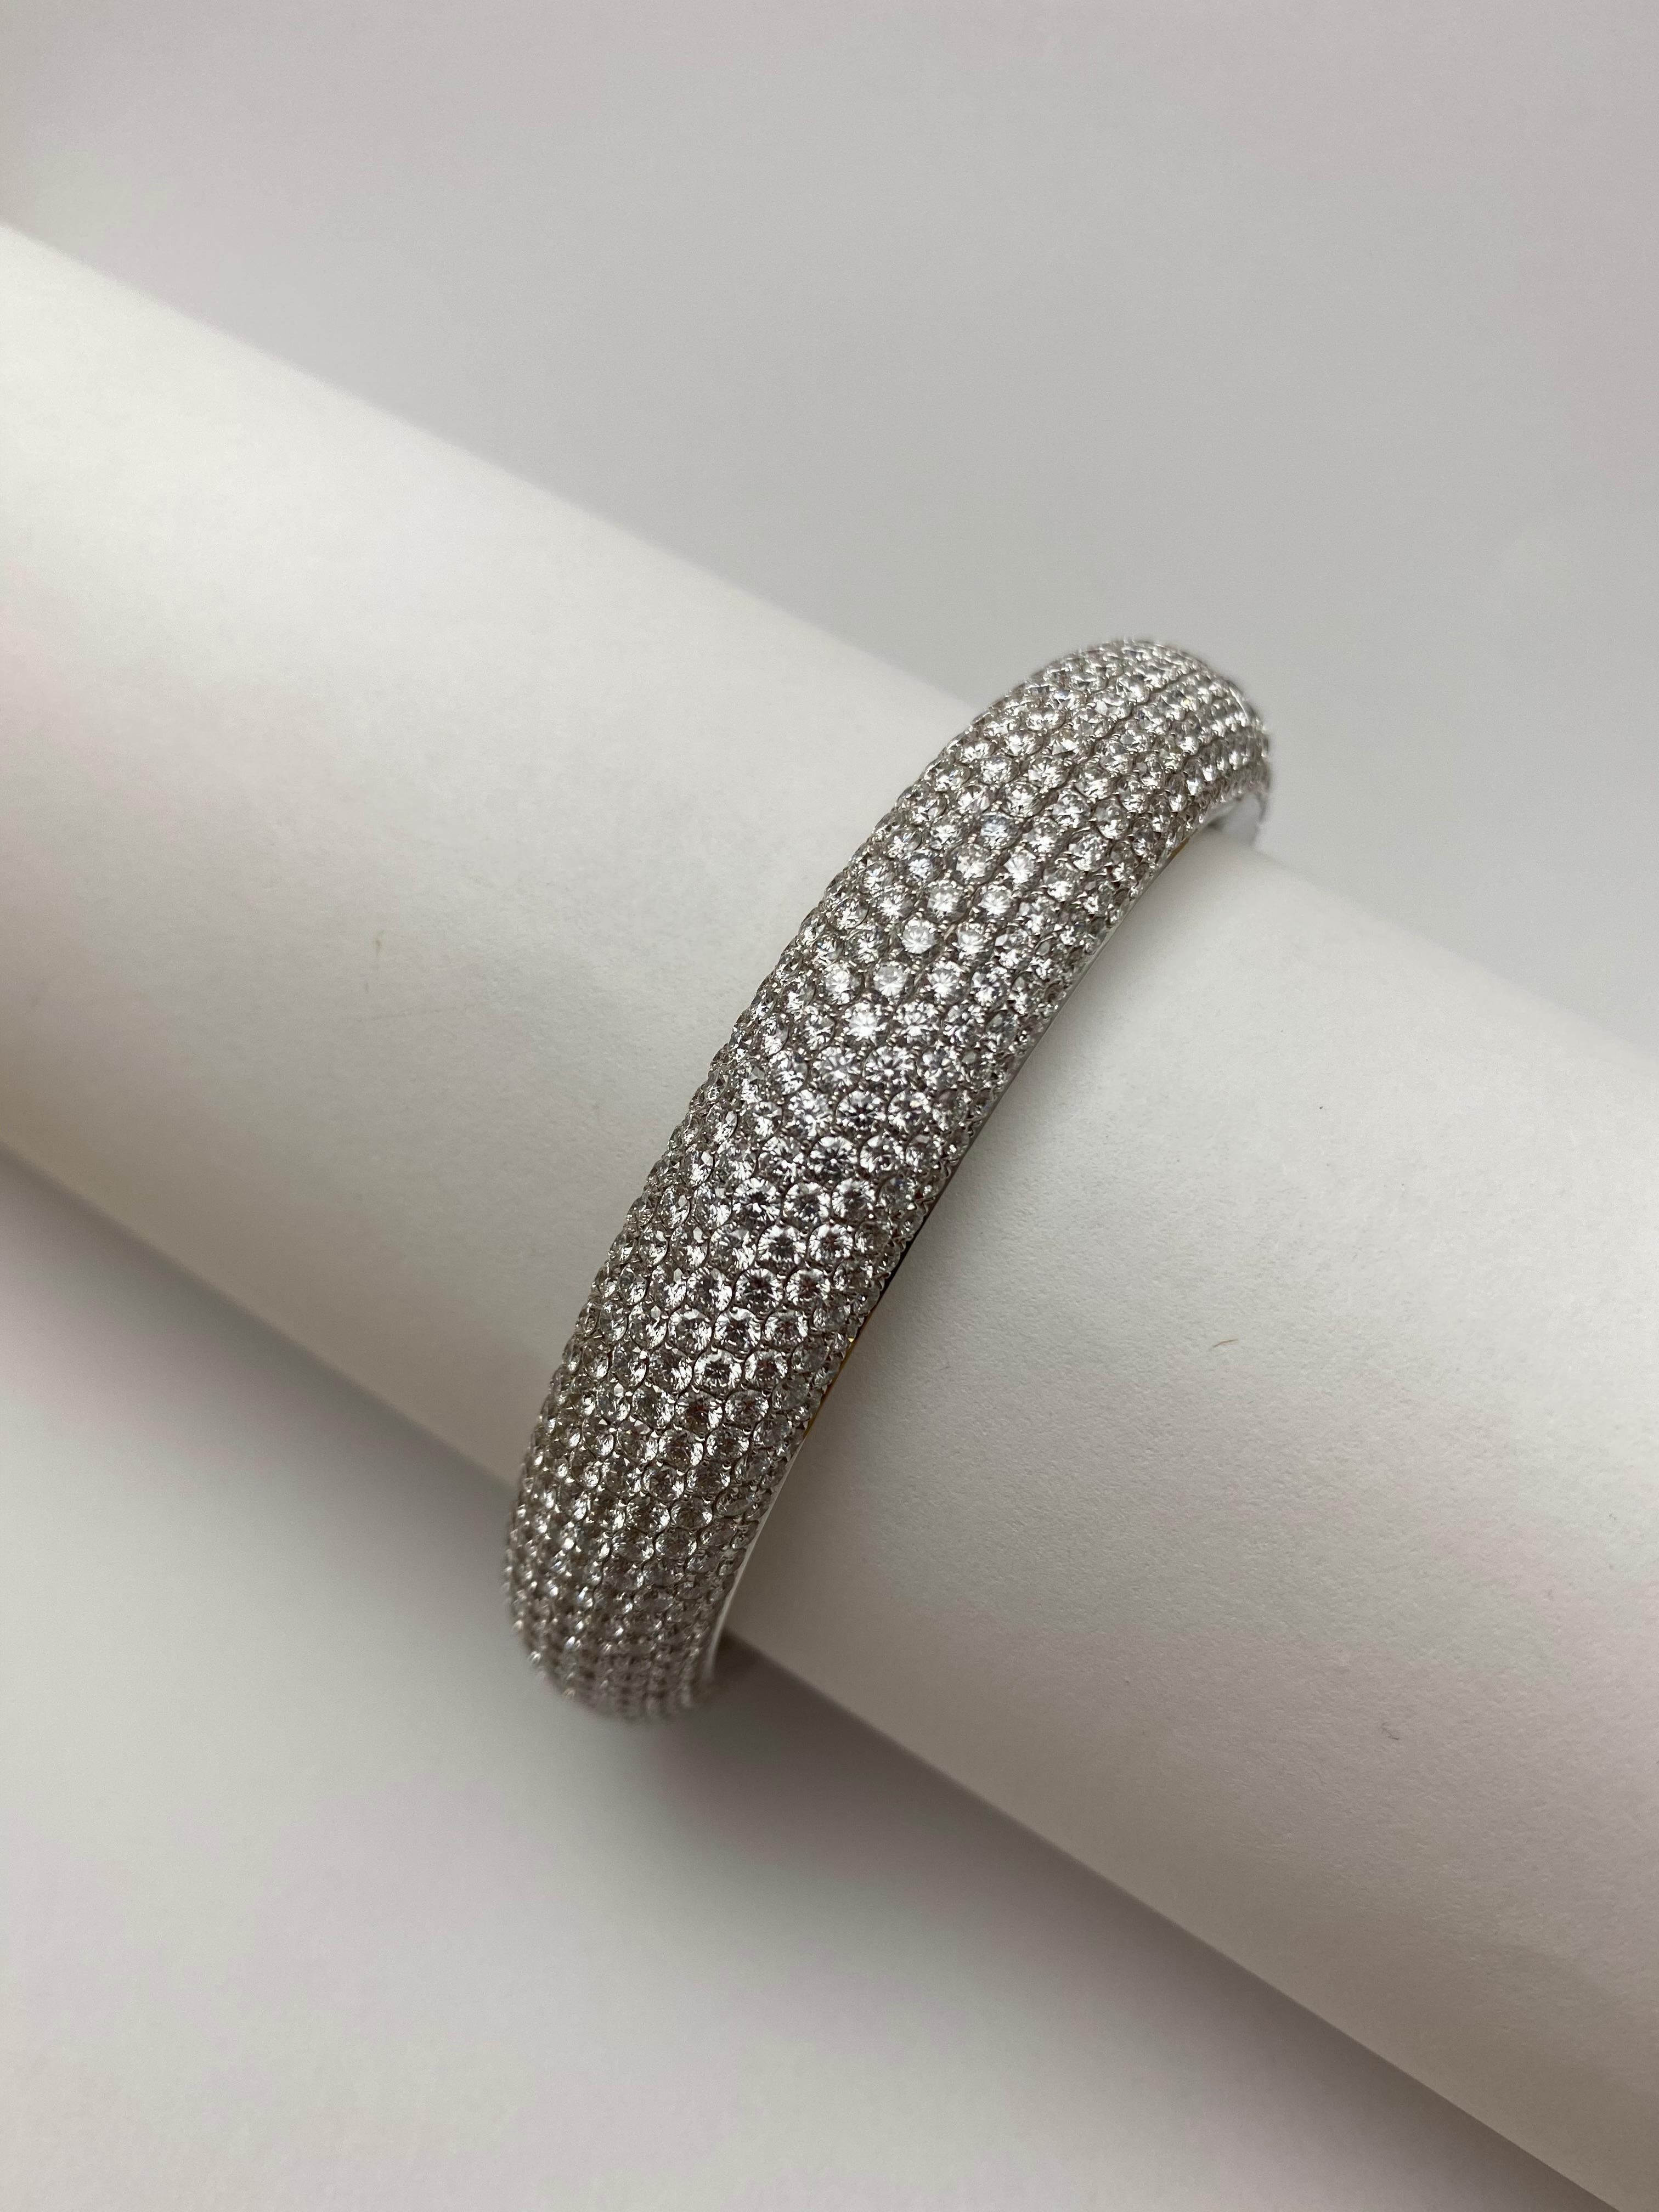 Made in France, this bangle is expertly set with over 25cts of bright, white diamonds.  It is as appropriate for an elegant event as it is for a chic soiree and this versatile jewel will bring joy to the wearer for years to come.  The unique